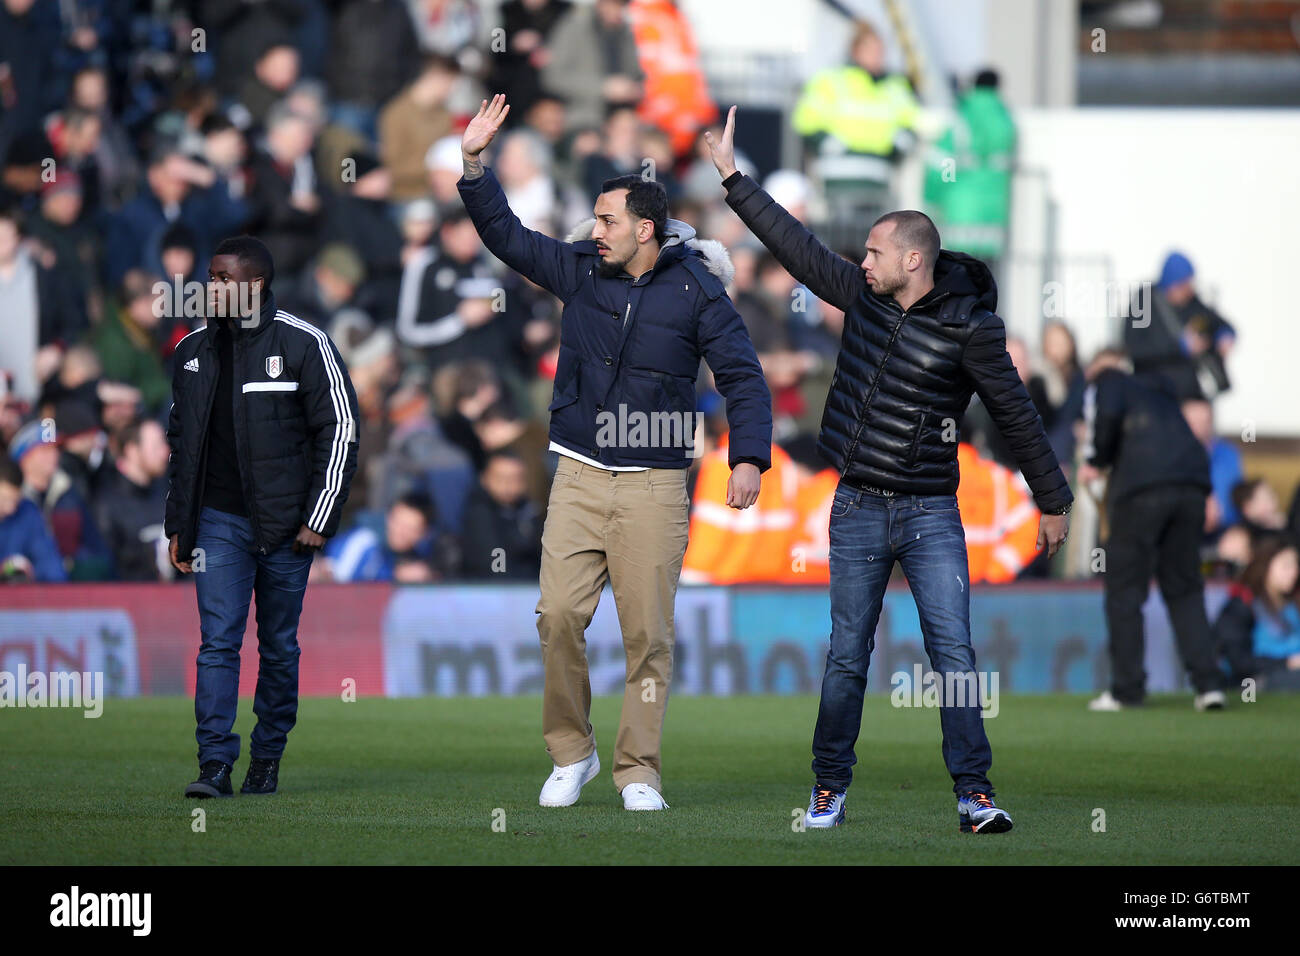 Fulham's new signings Johnny Heitinga (right), Kostas Mitroglou and Larnell Cole (left) wave to fans as they walk onto the pitch prior to the start of the game Stock Photo